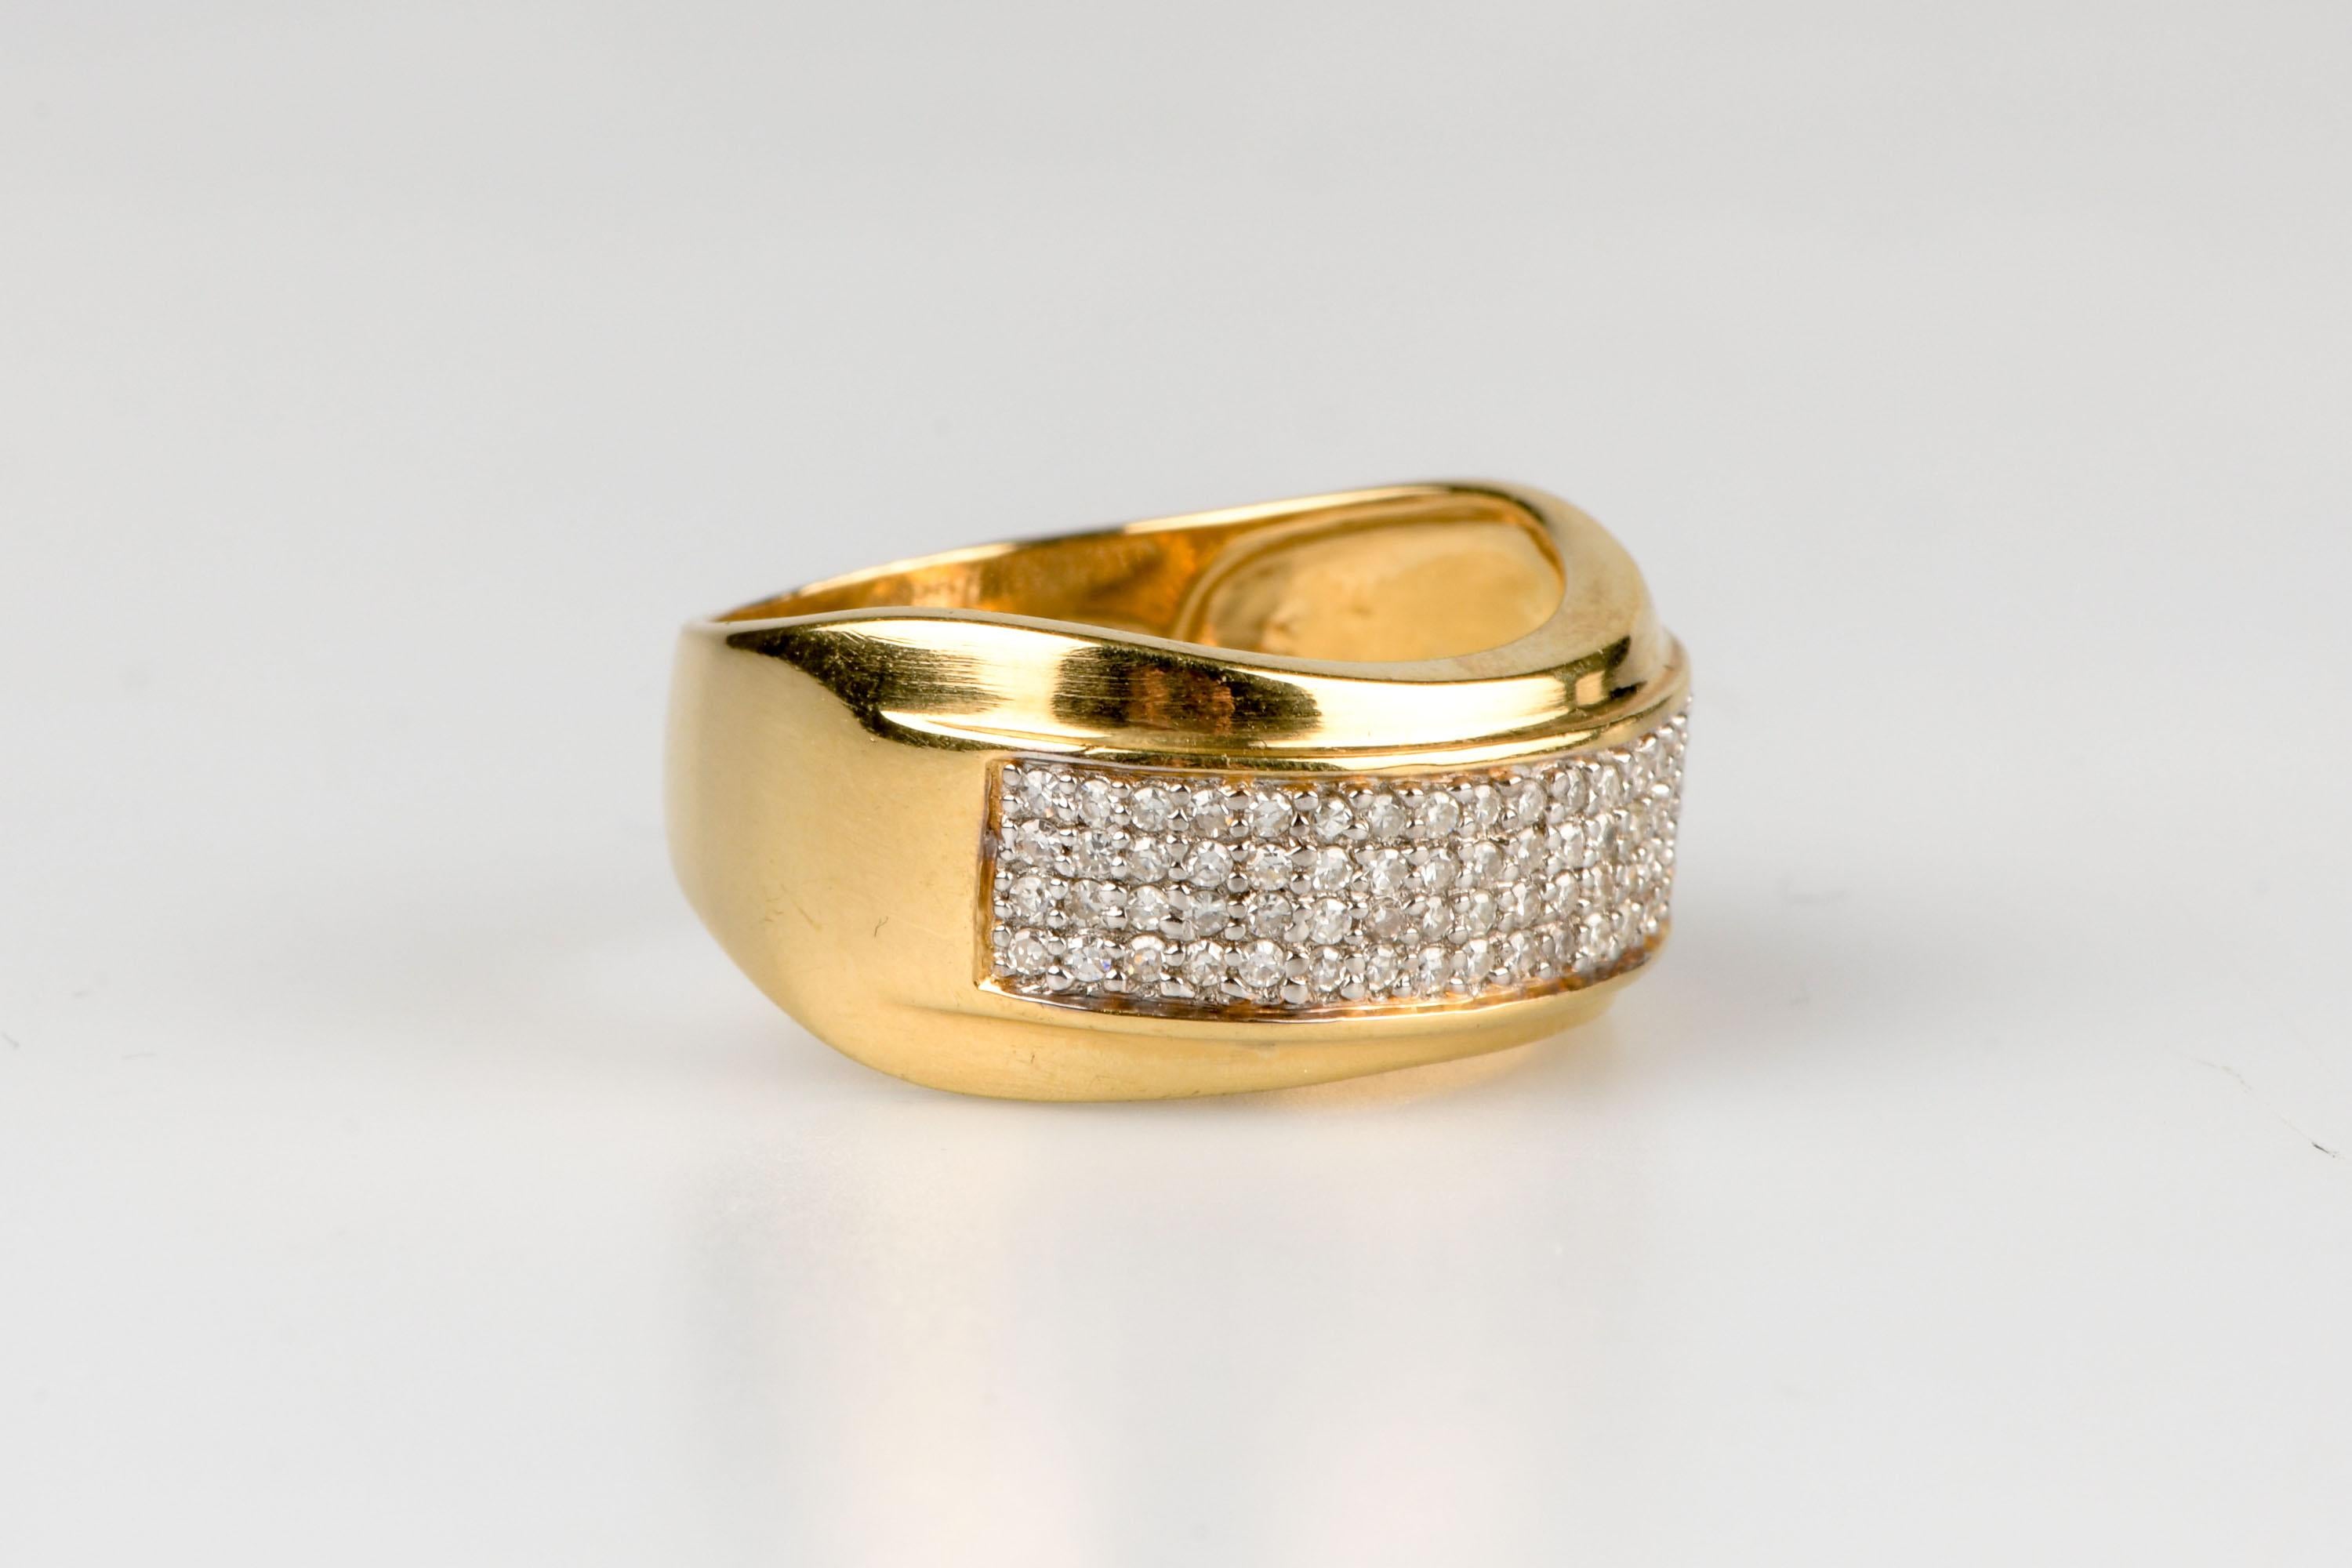 18 carat yellow gold ring designed with 80 round brilliant cut diamonds weighing 0.80 carat.               

Diamond quality
Color: H
Clarity: SI

Weight : 5.80 gr.

Size : EU : 52 - ES/IT : 12 - US : 6

Dimensions : 1.08 x 2.00 x 0.40 cm

Marked 18